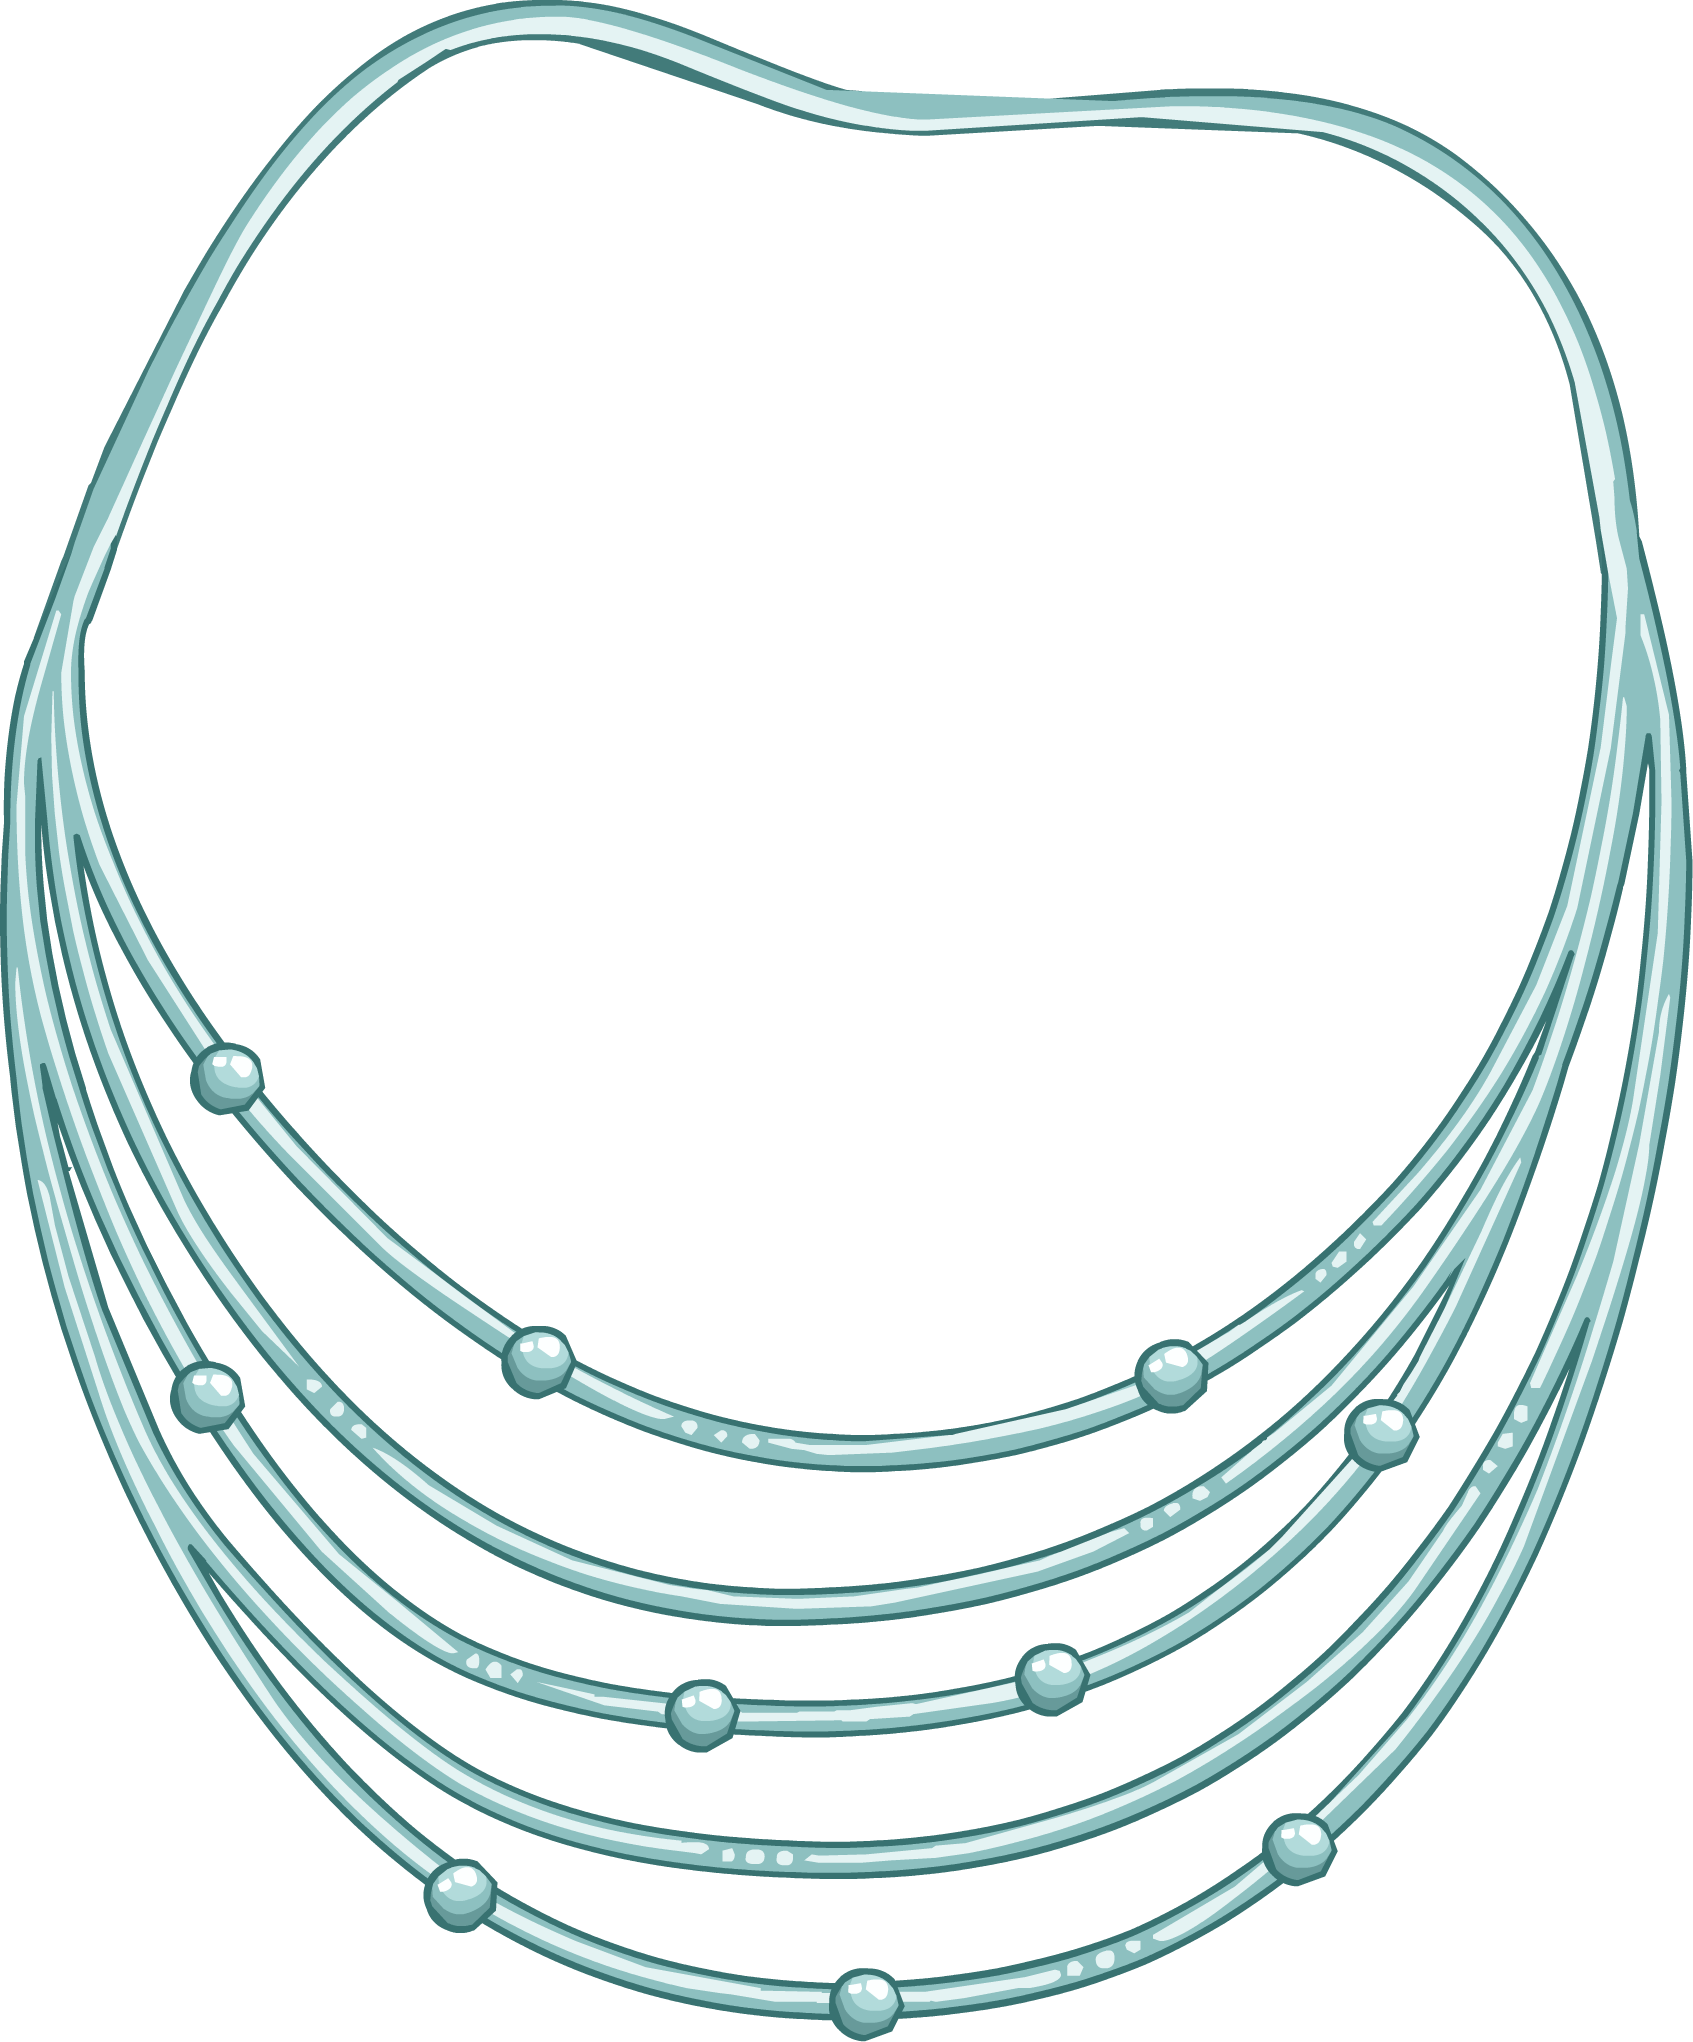 A Necklace With Multiple Strands Of Beads